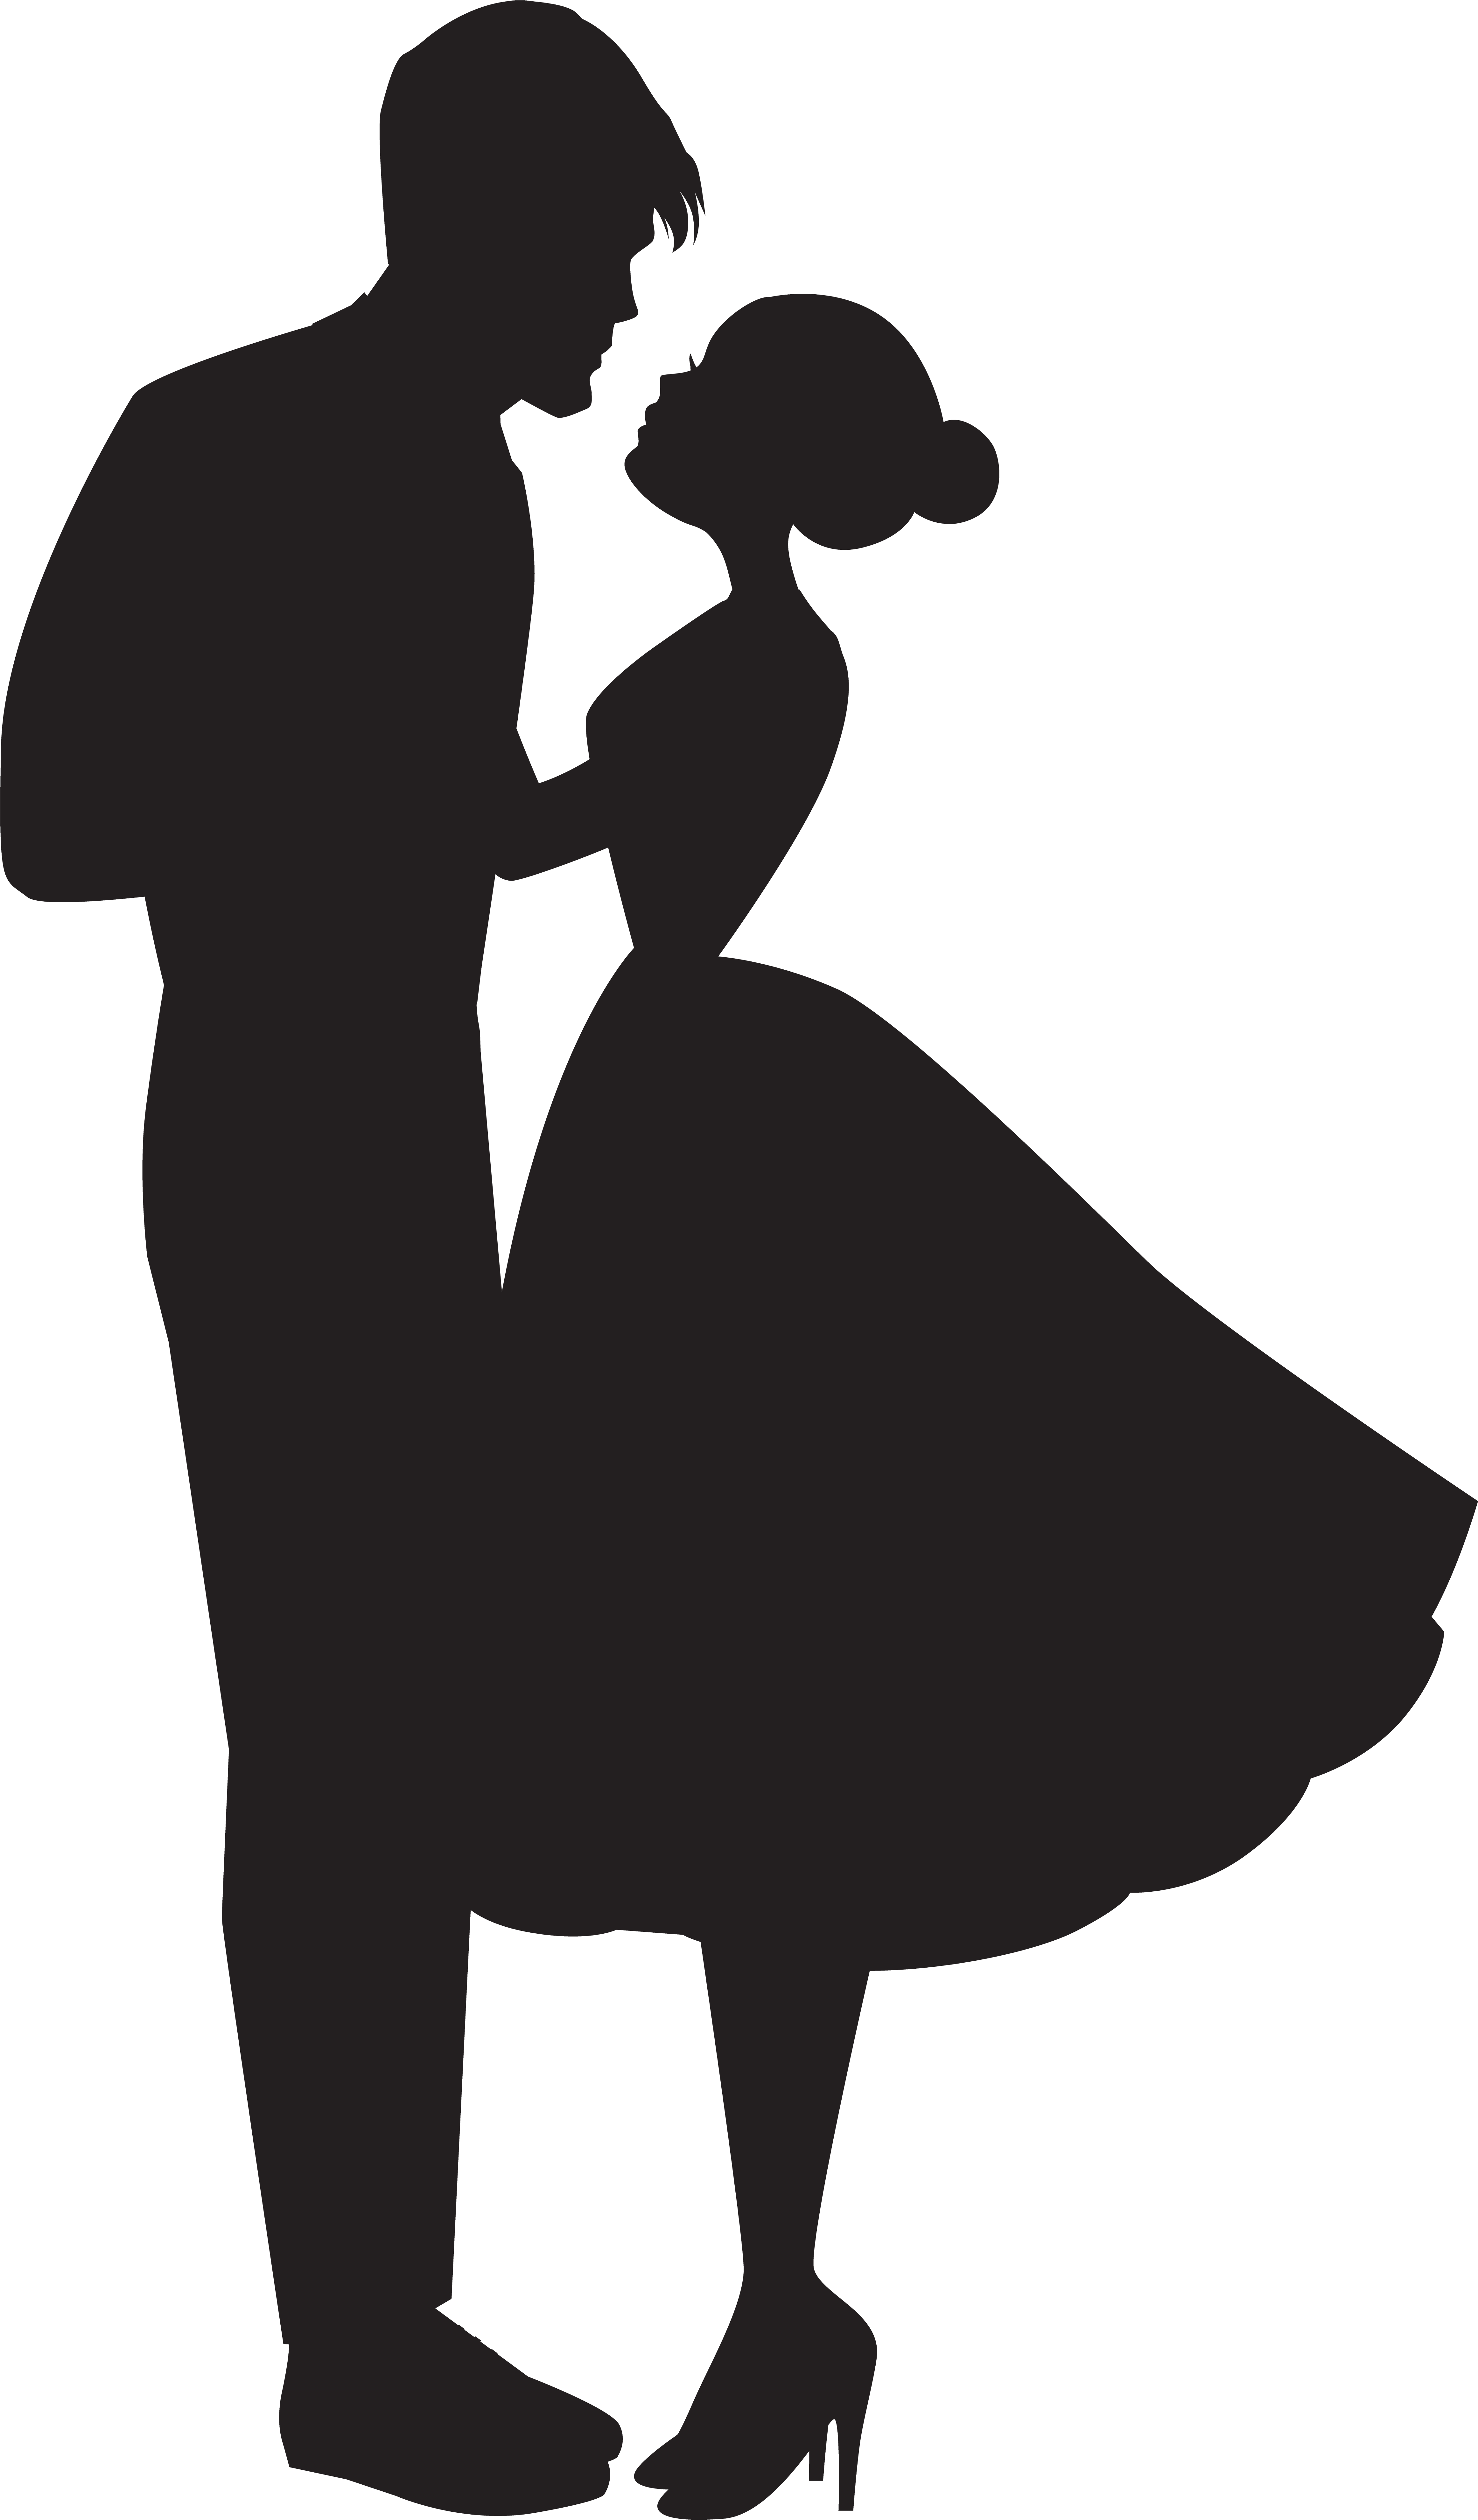 Couple Silhouette Png 4645 X 7921